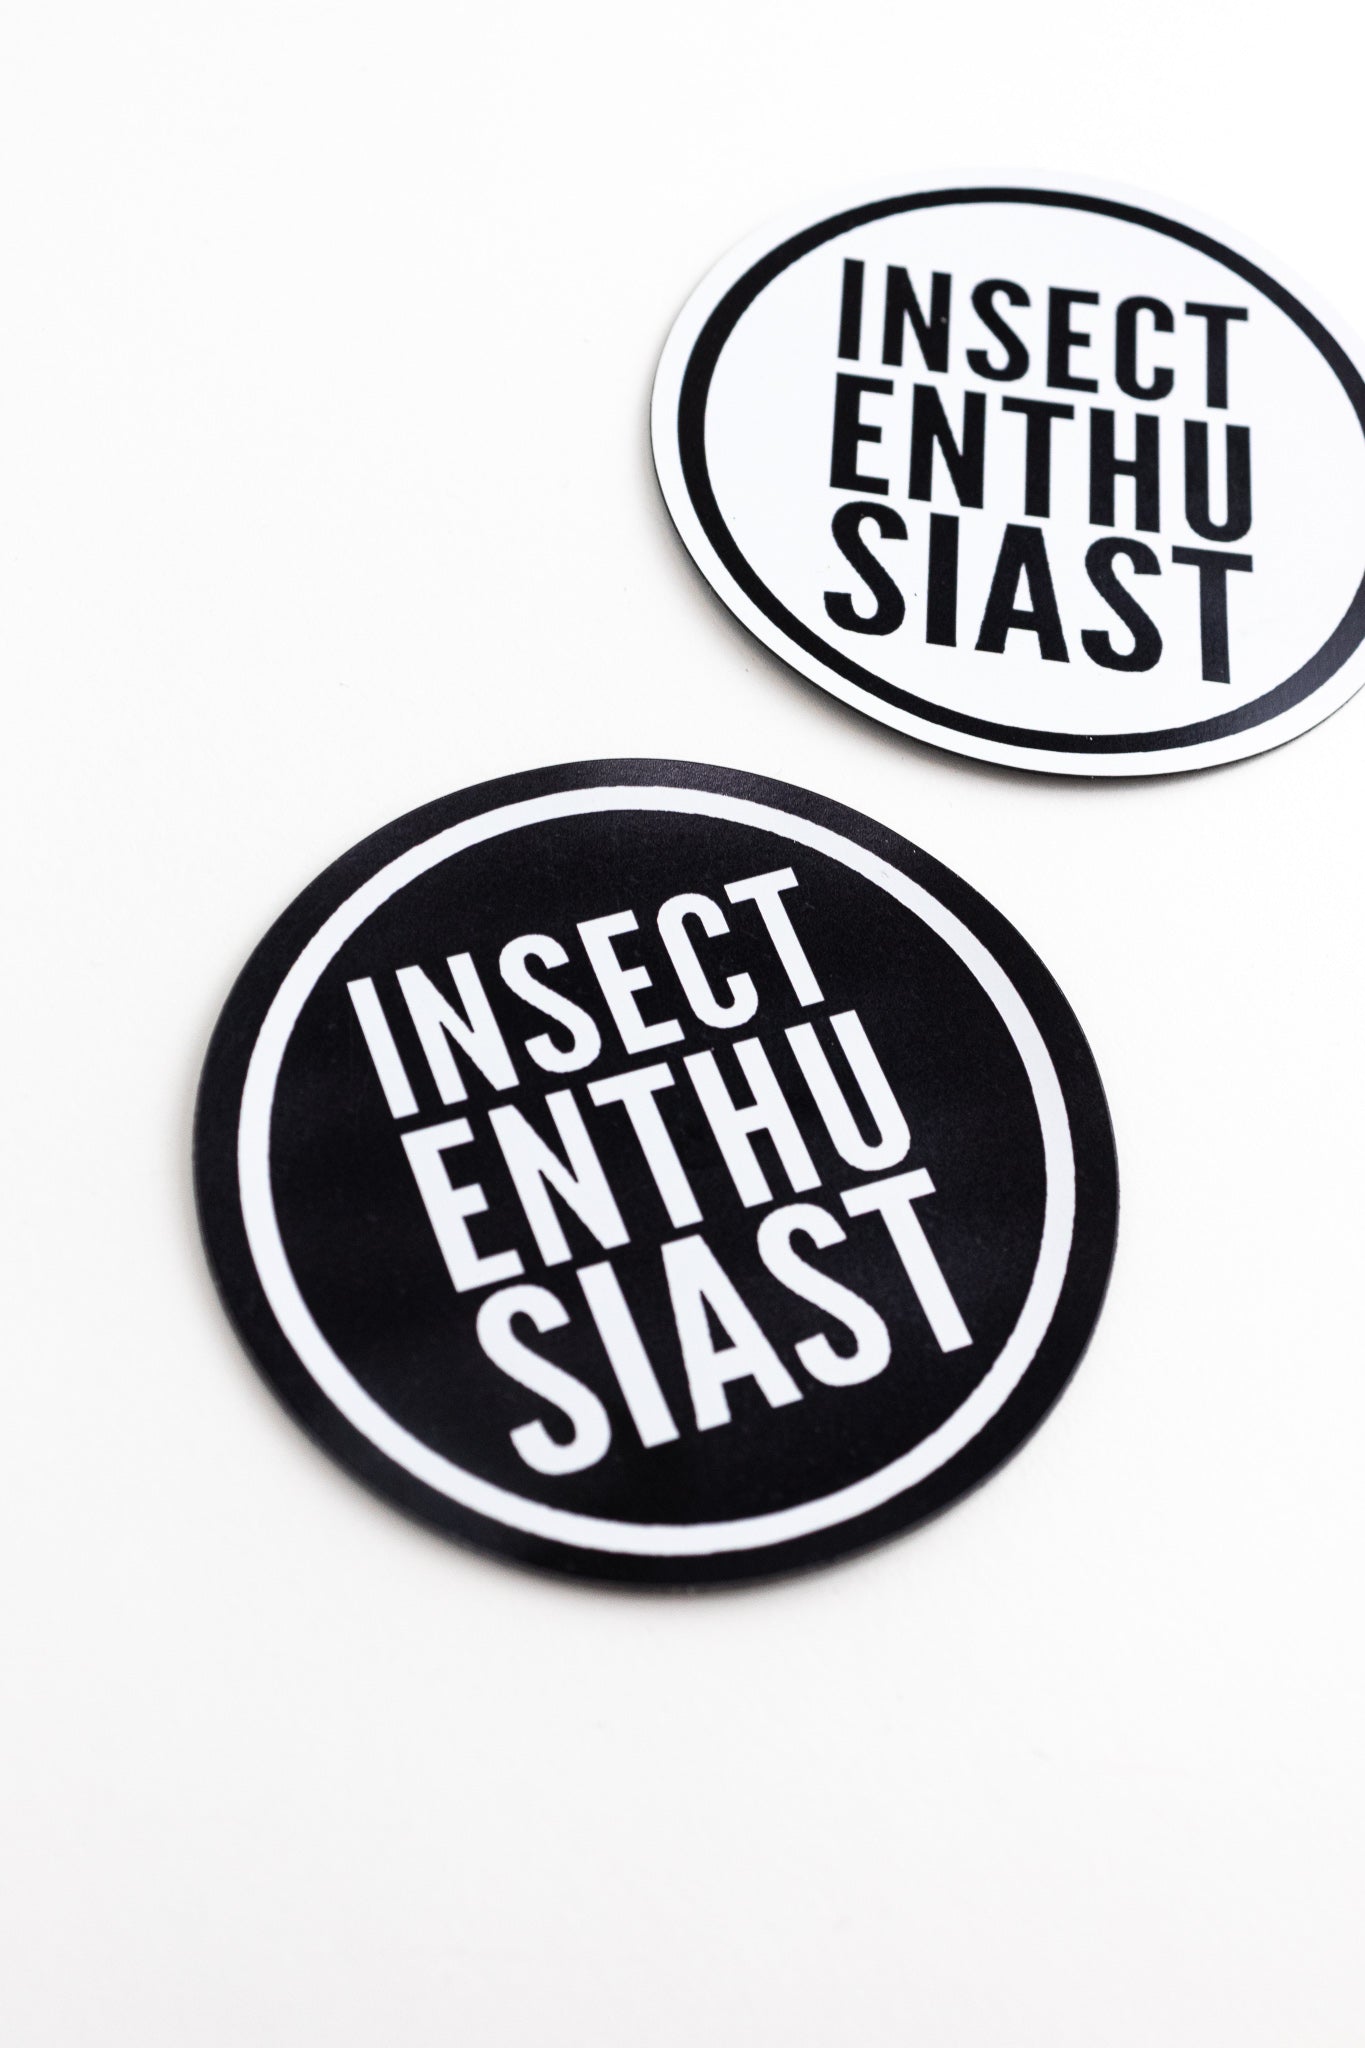 Insect Enthusiast Magnet - Stemcell Science Shop